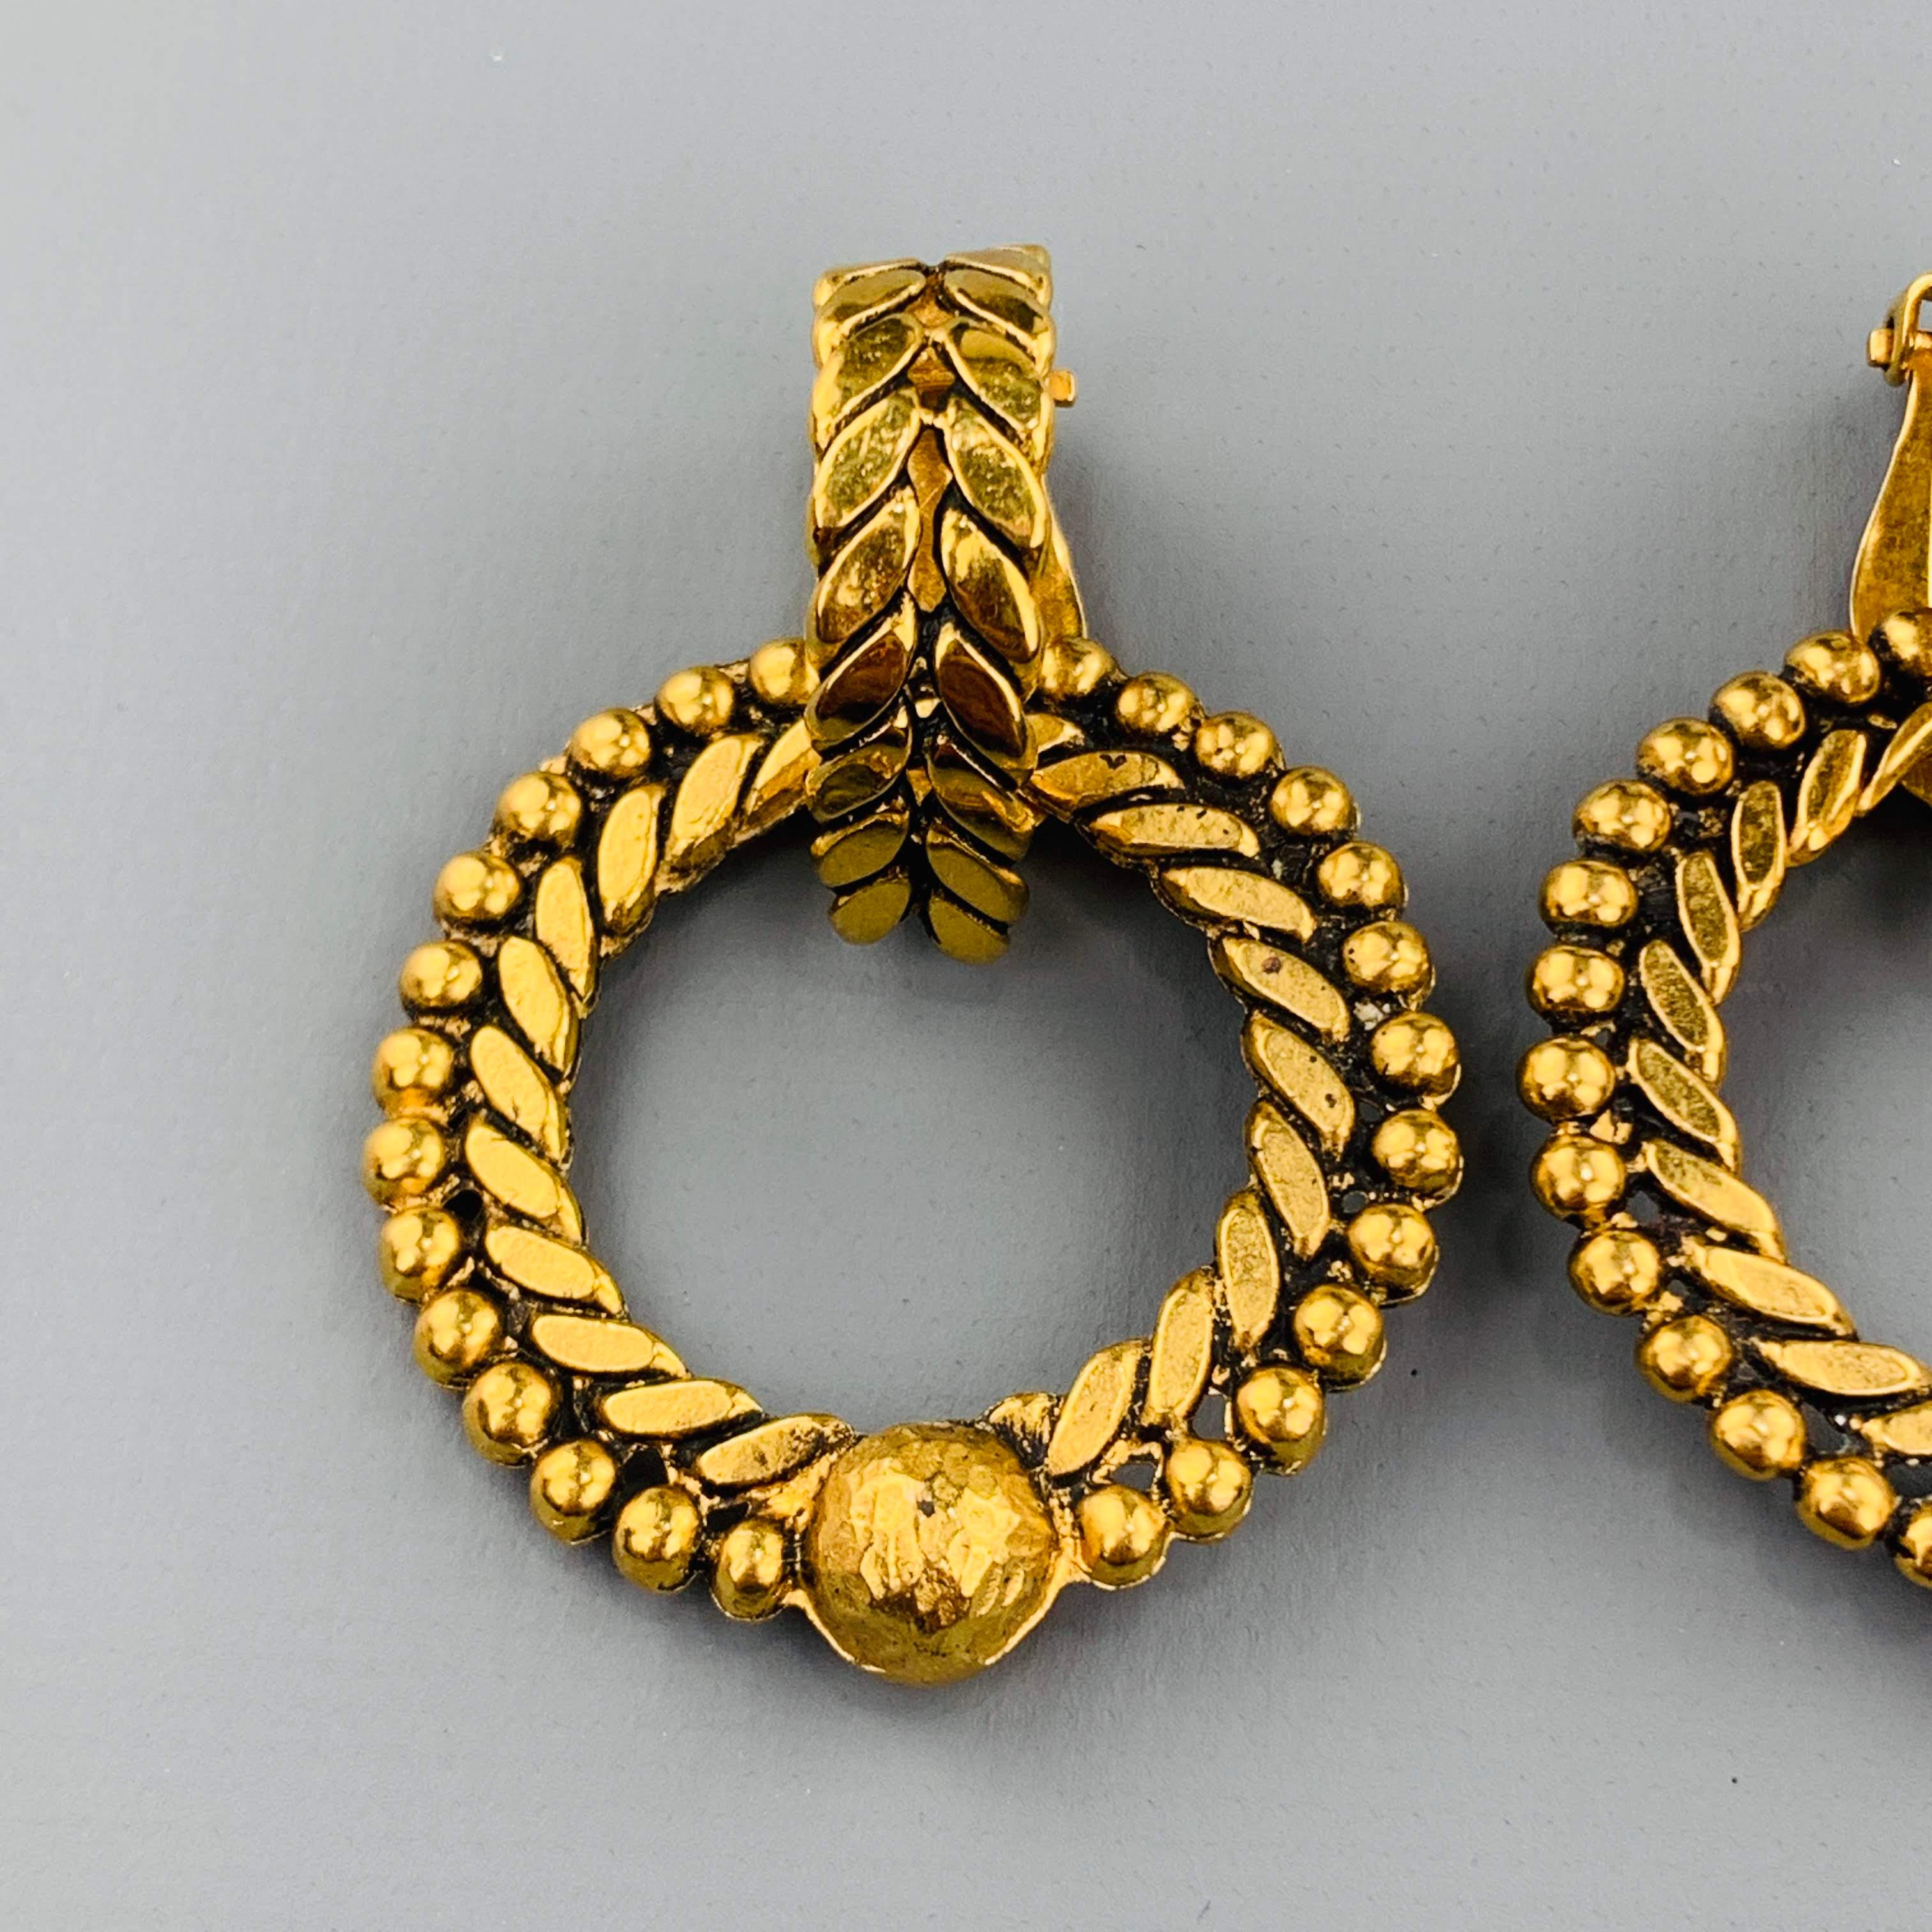 Vintage CHANEL clip on earrings come in antique effect yellow gold tone metal with a chain textured clip on half hoop and detachable textured drop hoops.
 
Excellent Pre-Owned Condition.
Marked: 2251
 
Clip On: 2.75 x 0.75 cm.
Hoop: 3.75 cm.